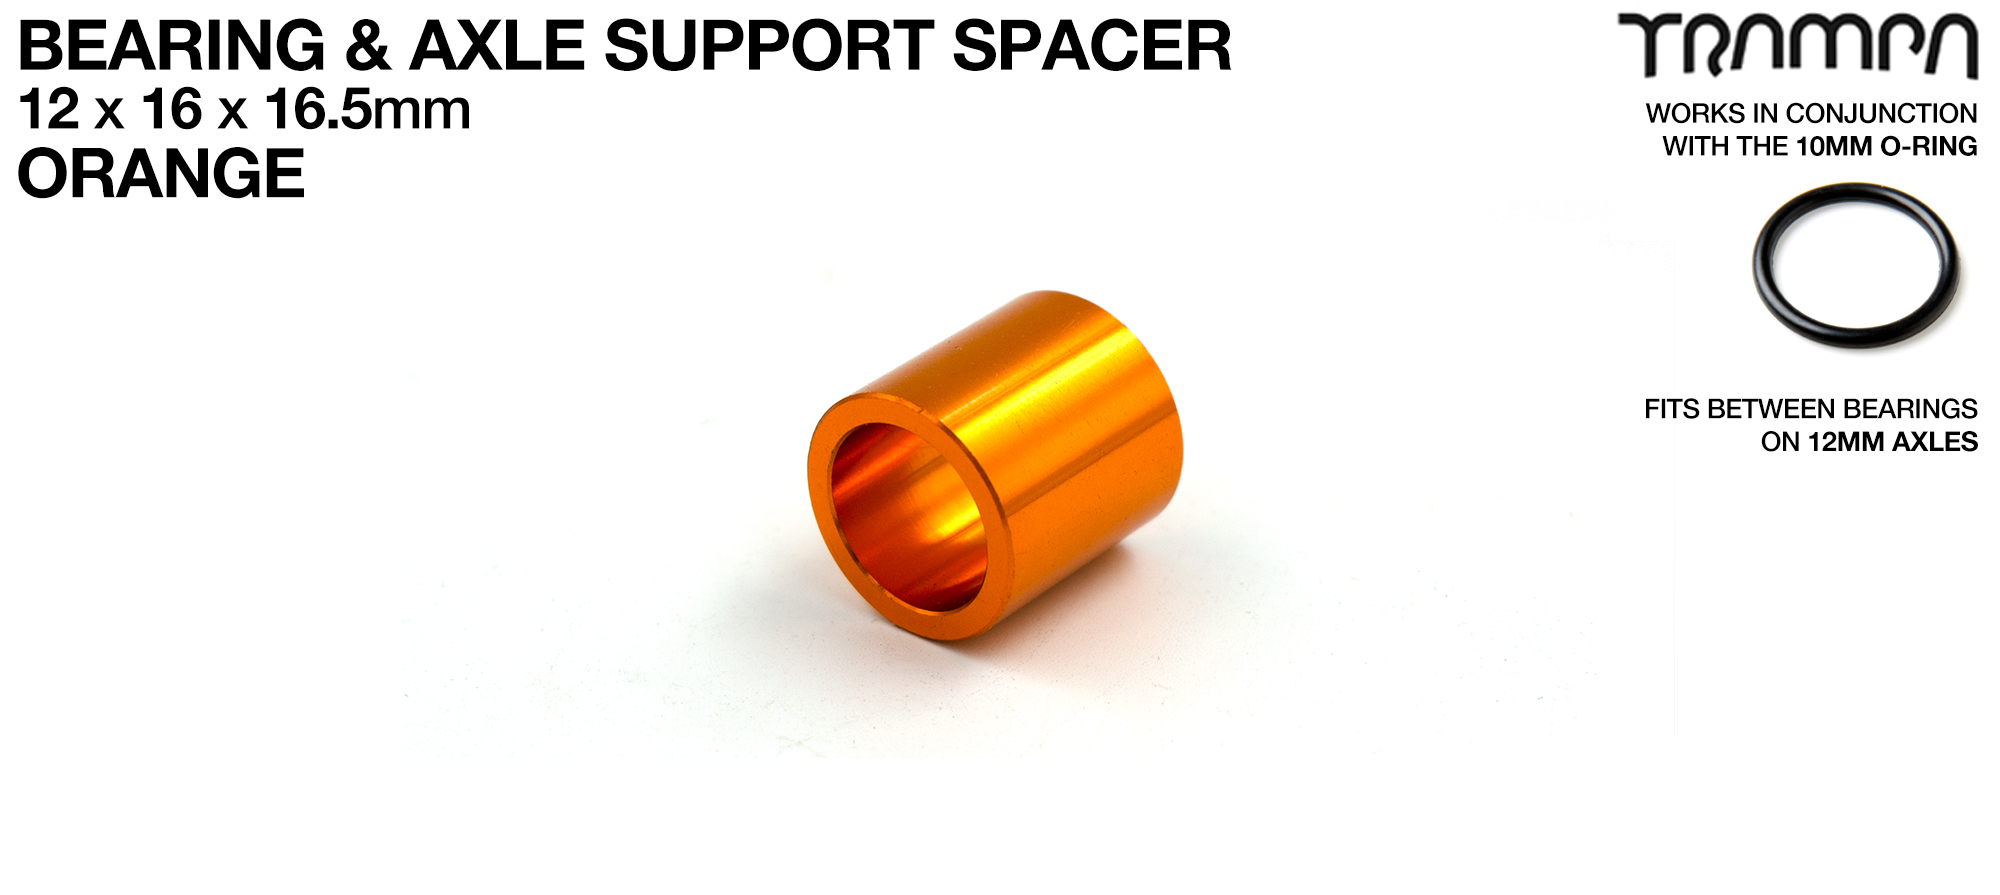 Internal Bearing support spacer used with 10mm O-RIng on 12mm axles - 12 x 16 x 16.5mm - ORANGE